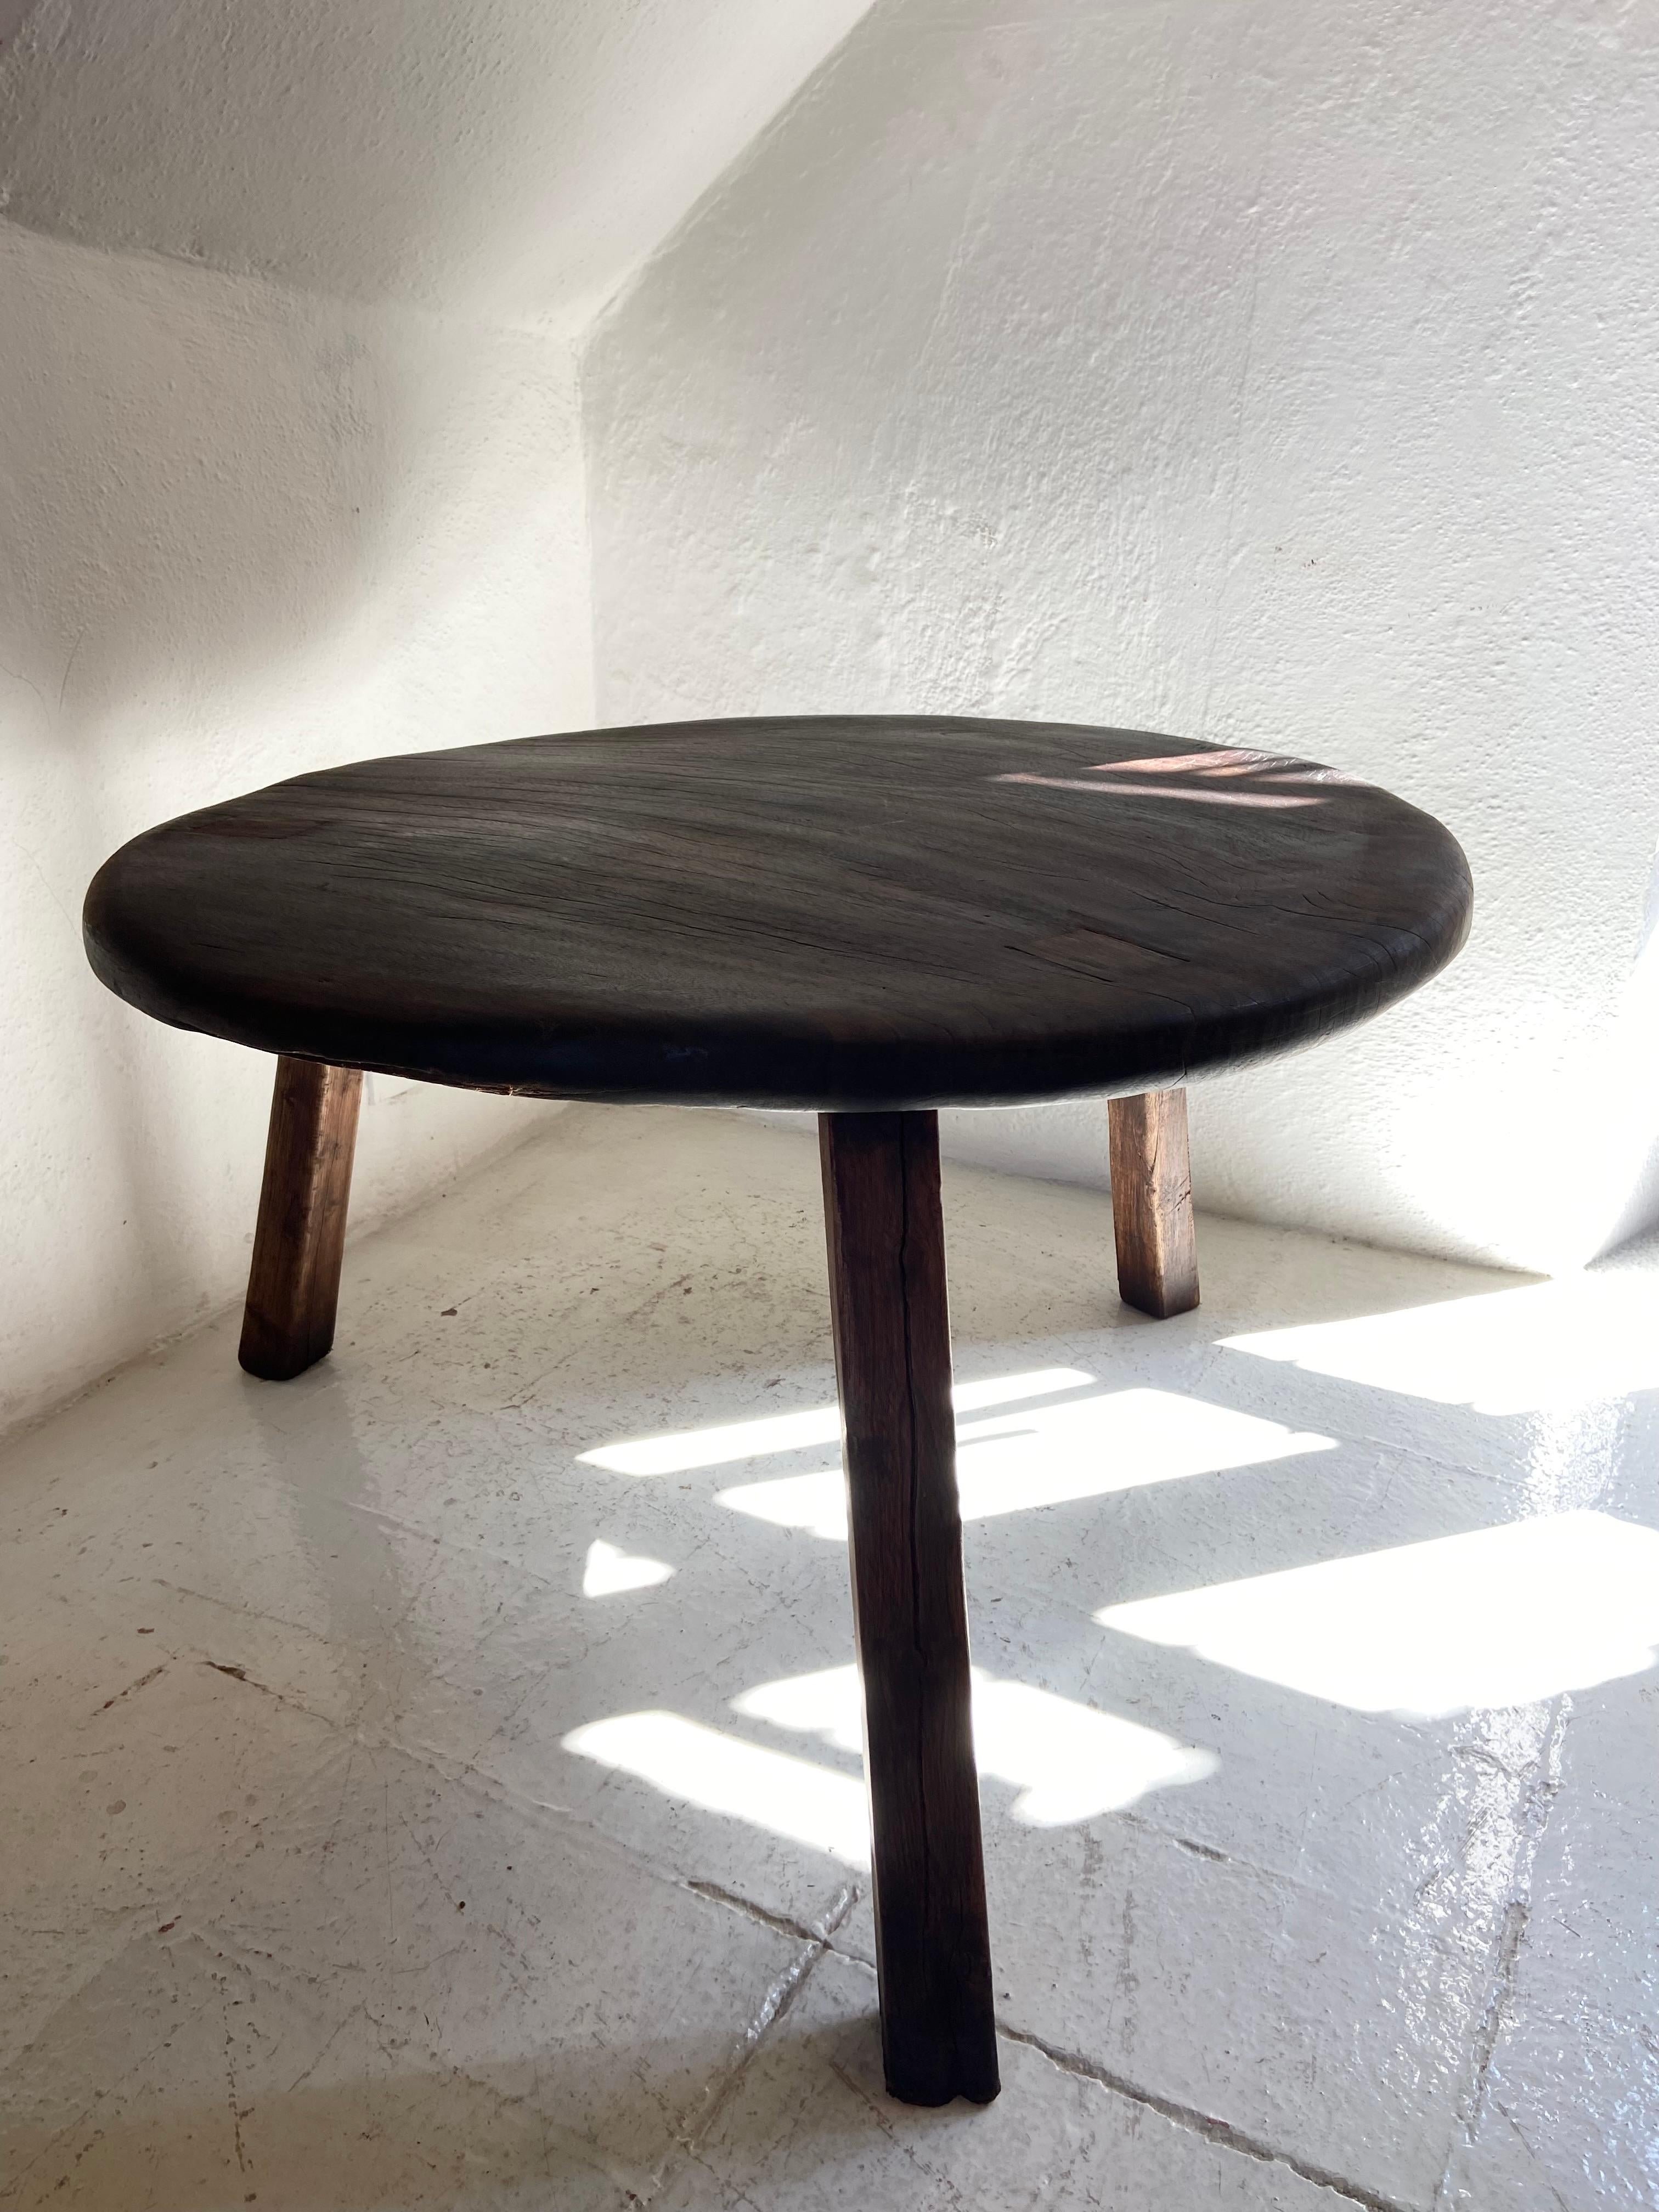 Primitive Hardwood Round Table by Artefakto
Unique piece.
Dimensions: Ø 81 x H 49 cm.
Materials: Hardwood.
Central Yucatan, Mexico 1970s.

Artefakto opened its doors on the Riviera Nayarit coastline in 2010. With an unrelenting passion for all